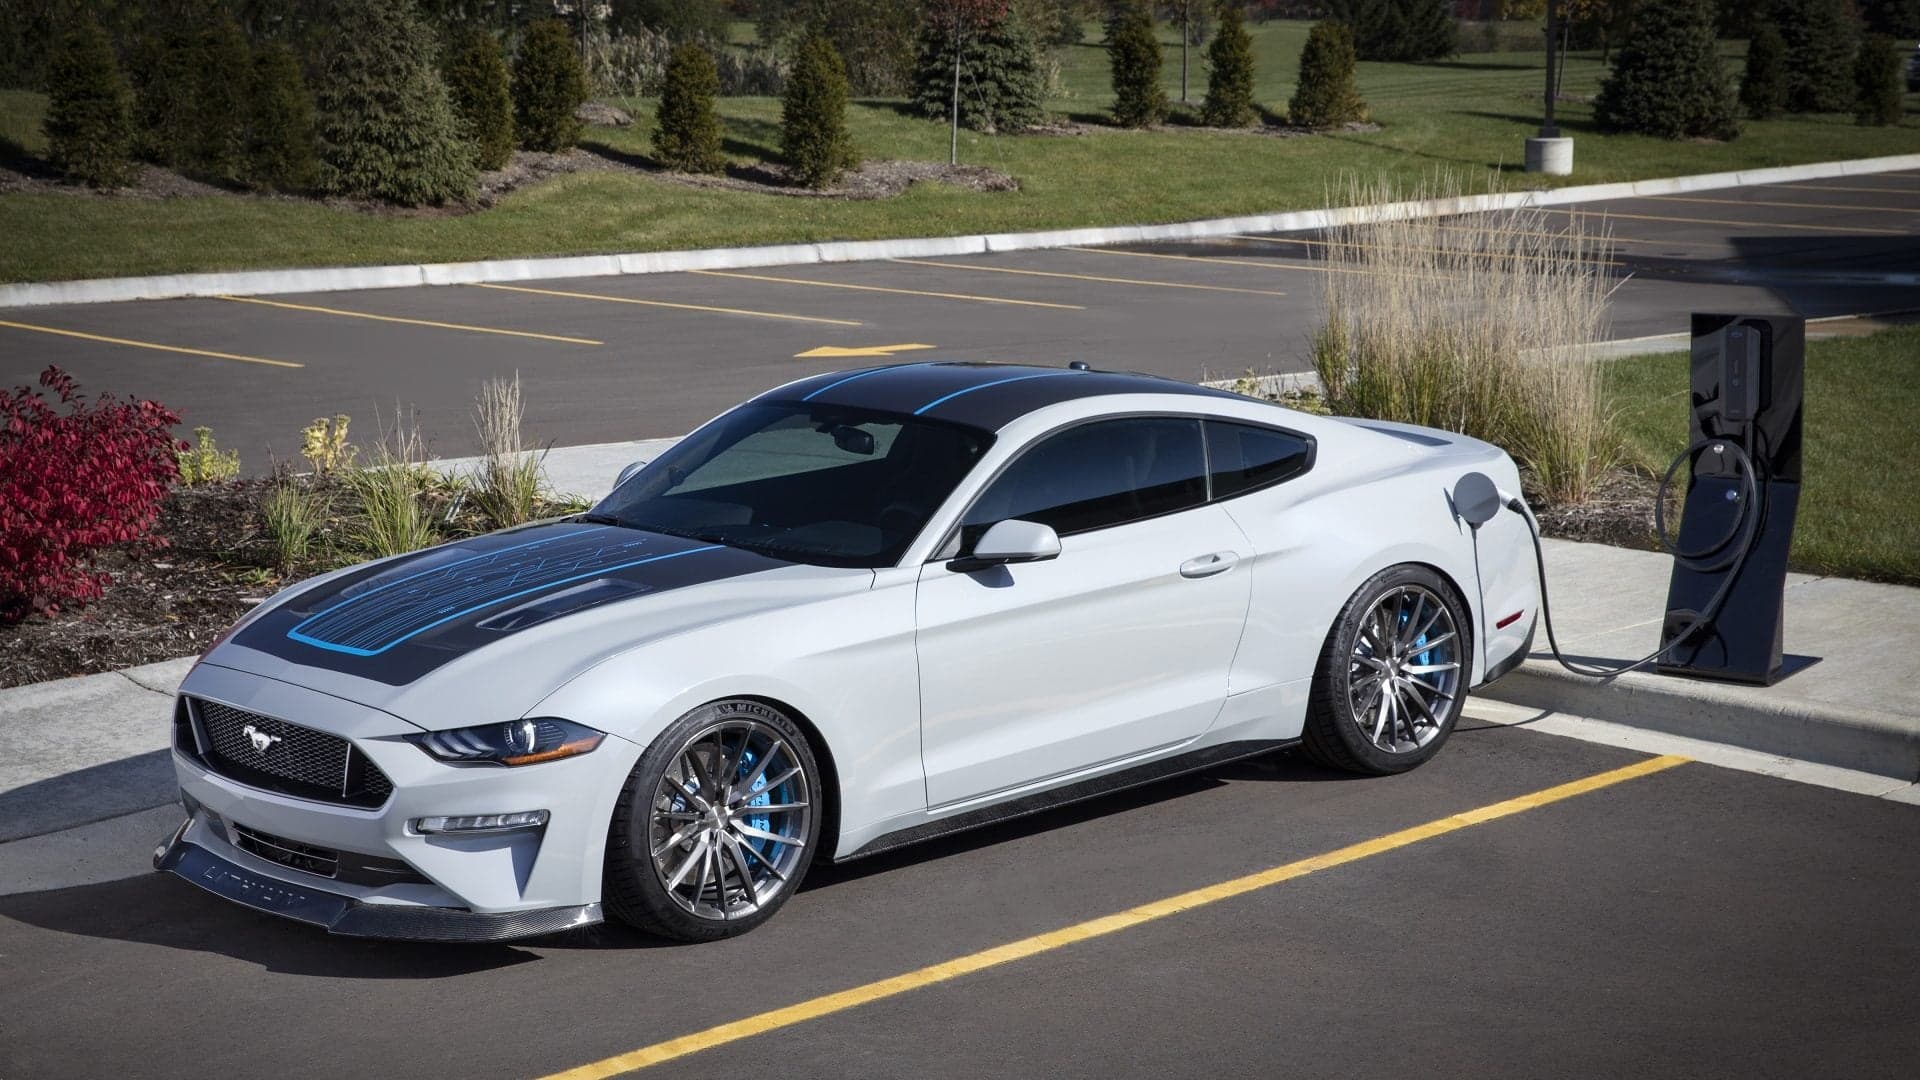 Ford Mustang Lithium Is a 900-HP Electric Pony Car With a Six-Speed Manual